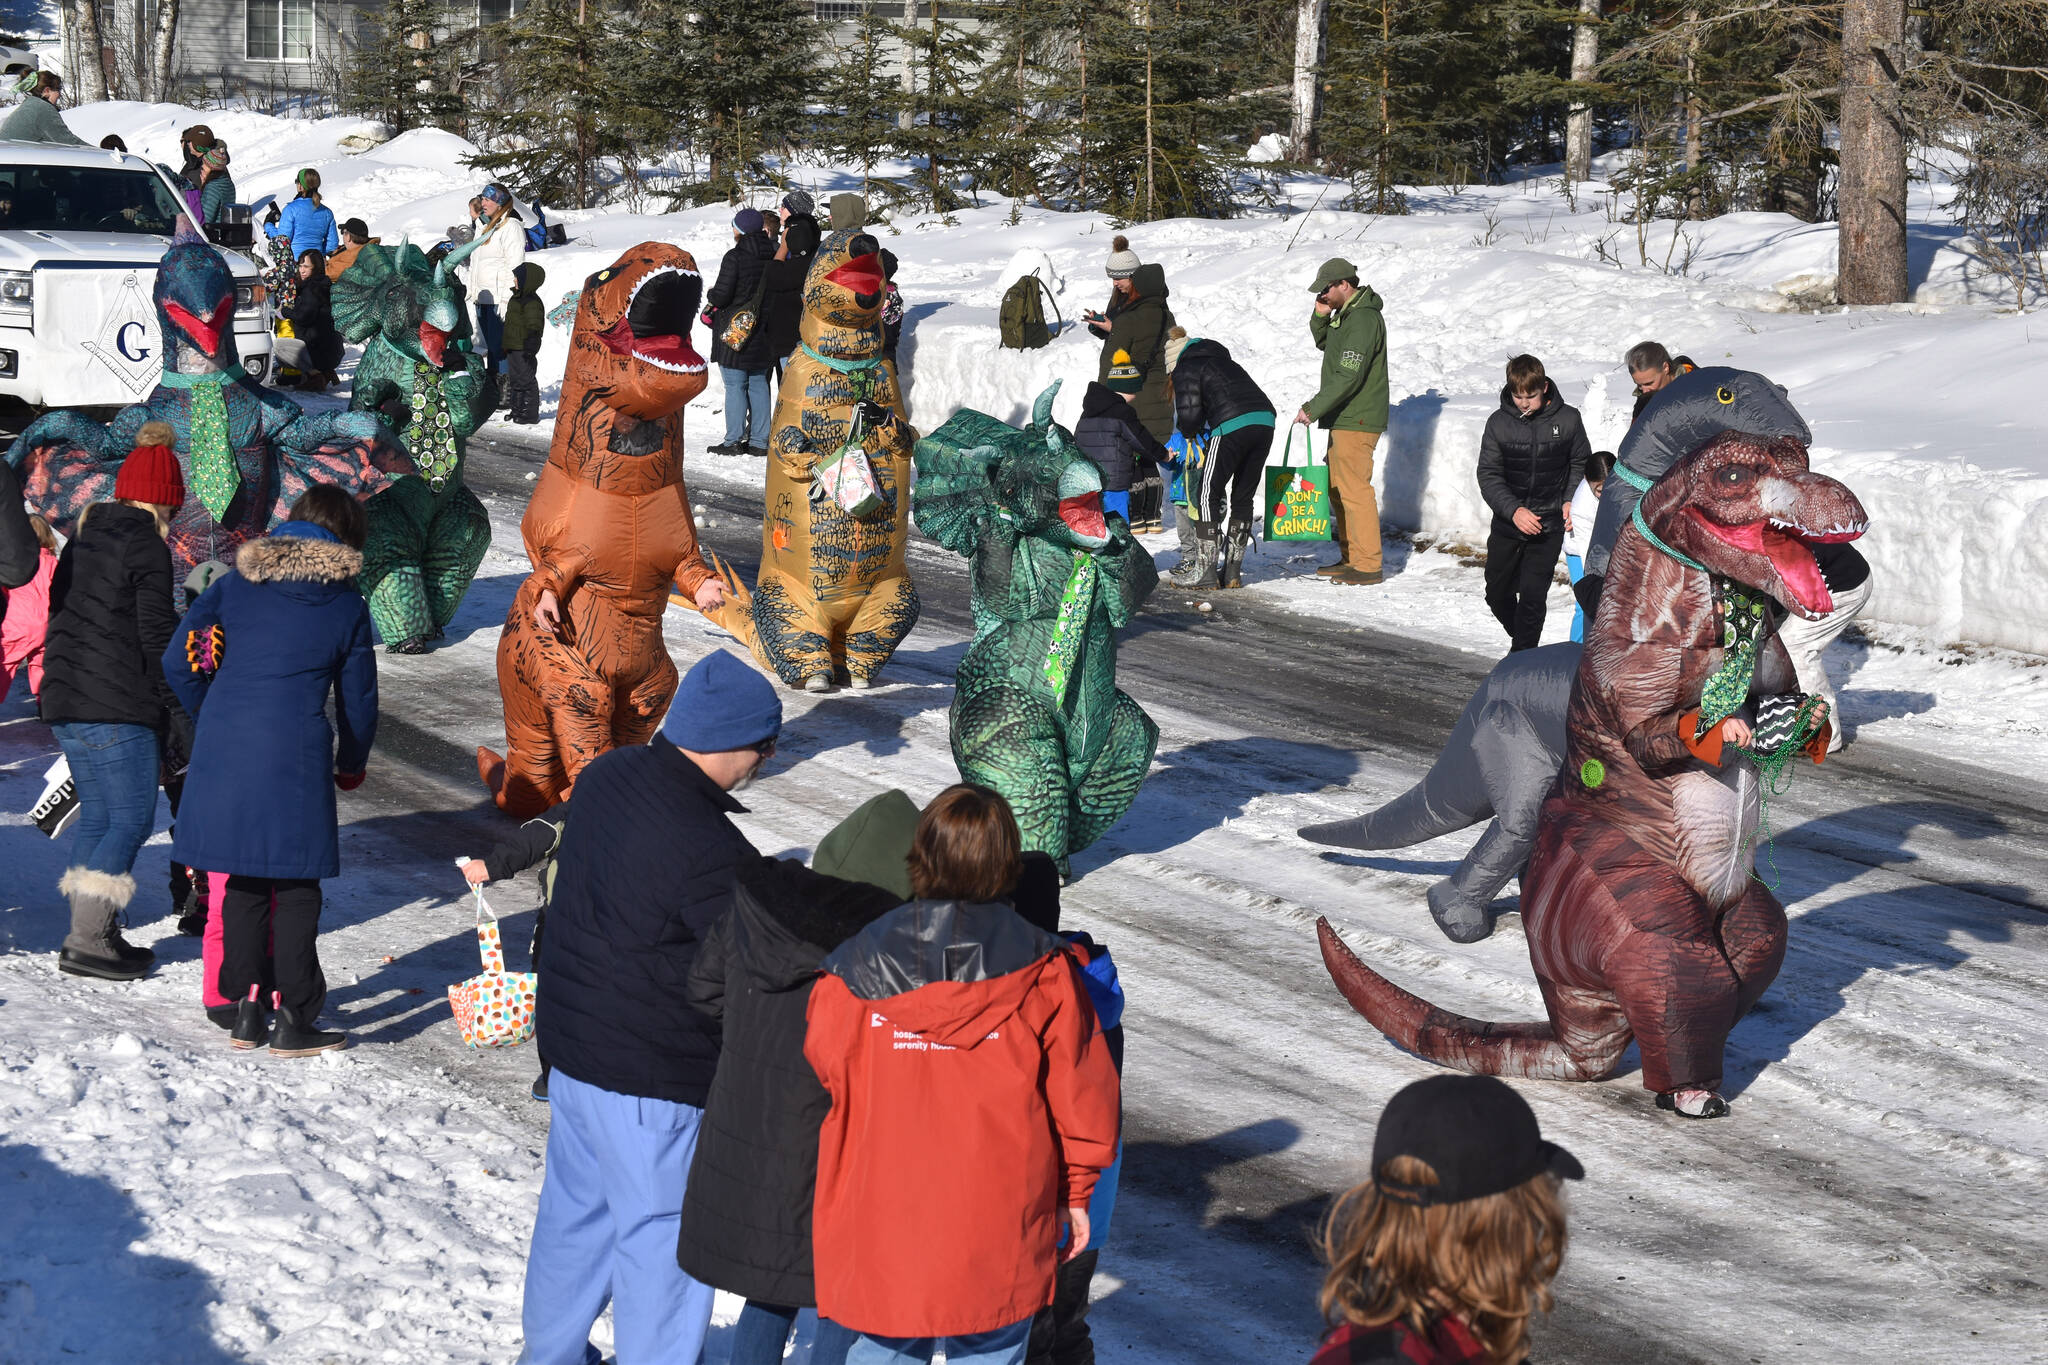 A herd of dinosaurs pass out candy as the 32nd annual Sweeney’s St. Patrick’s Day Parade proceeds down Fireweed Street in Soldotna, Alaska on Friday, March 17, 2023. (Jake Dye/Peninsula Clarion)